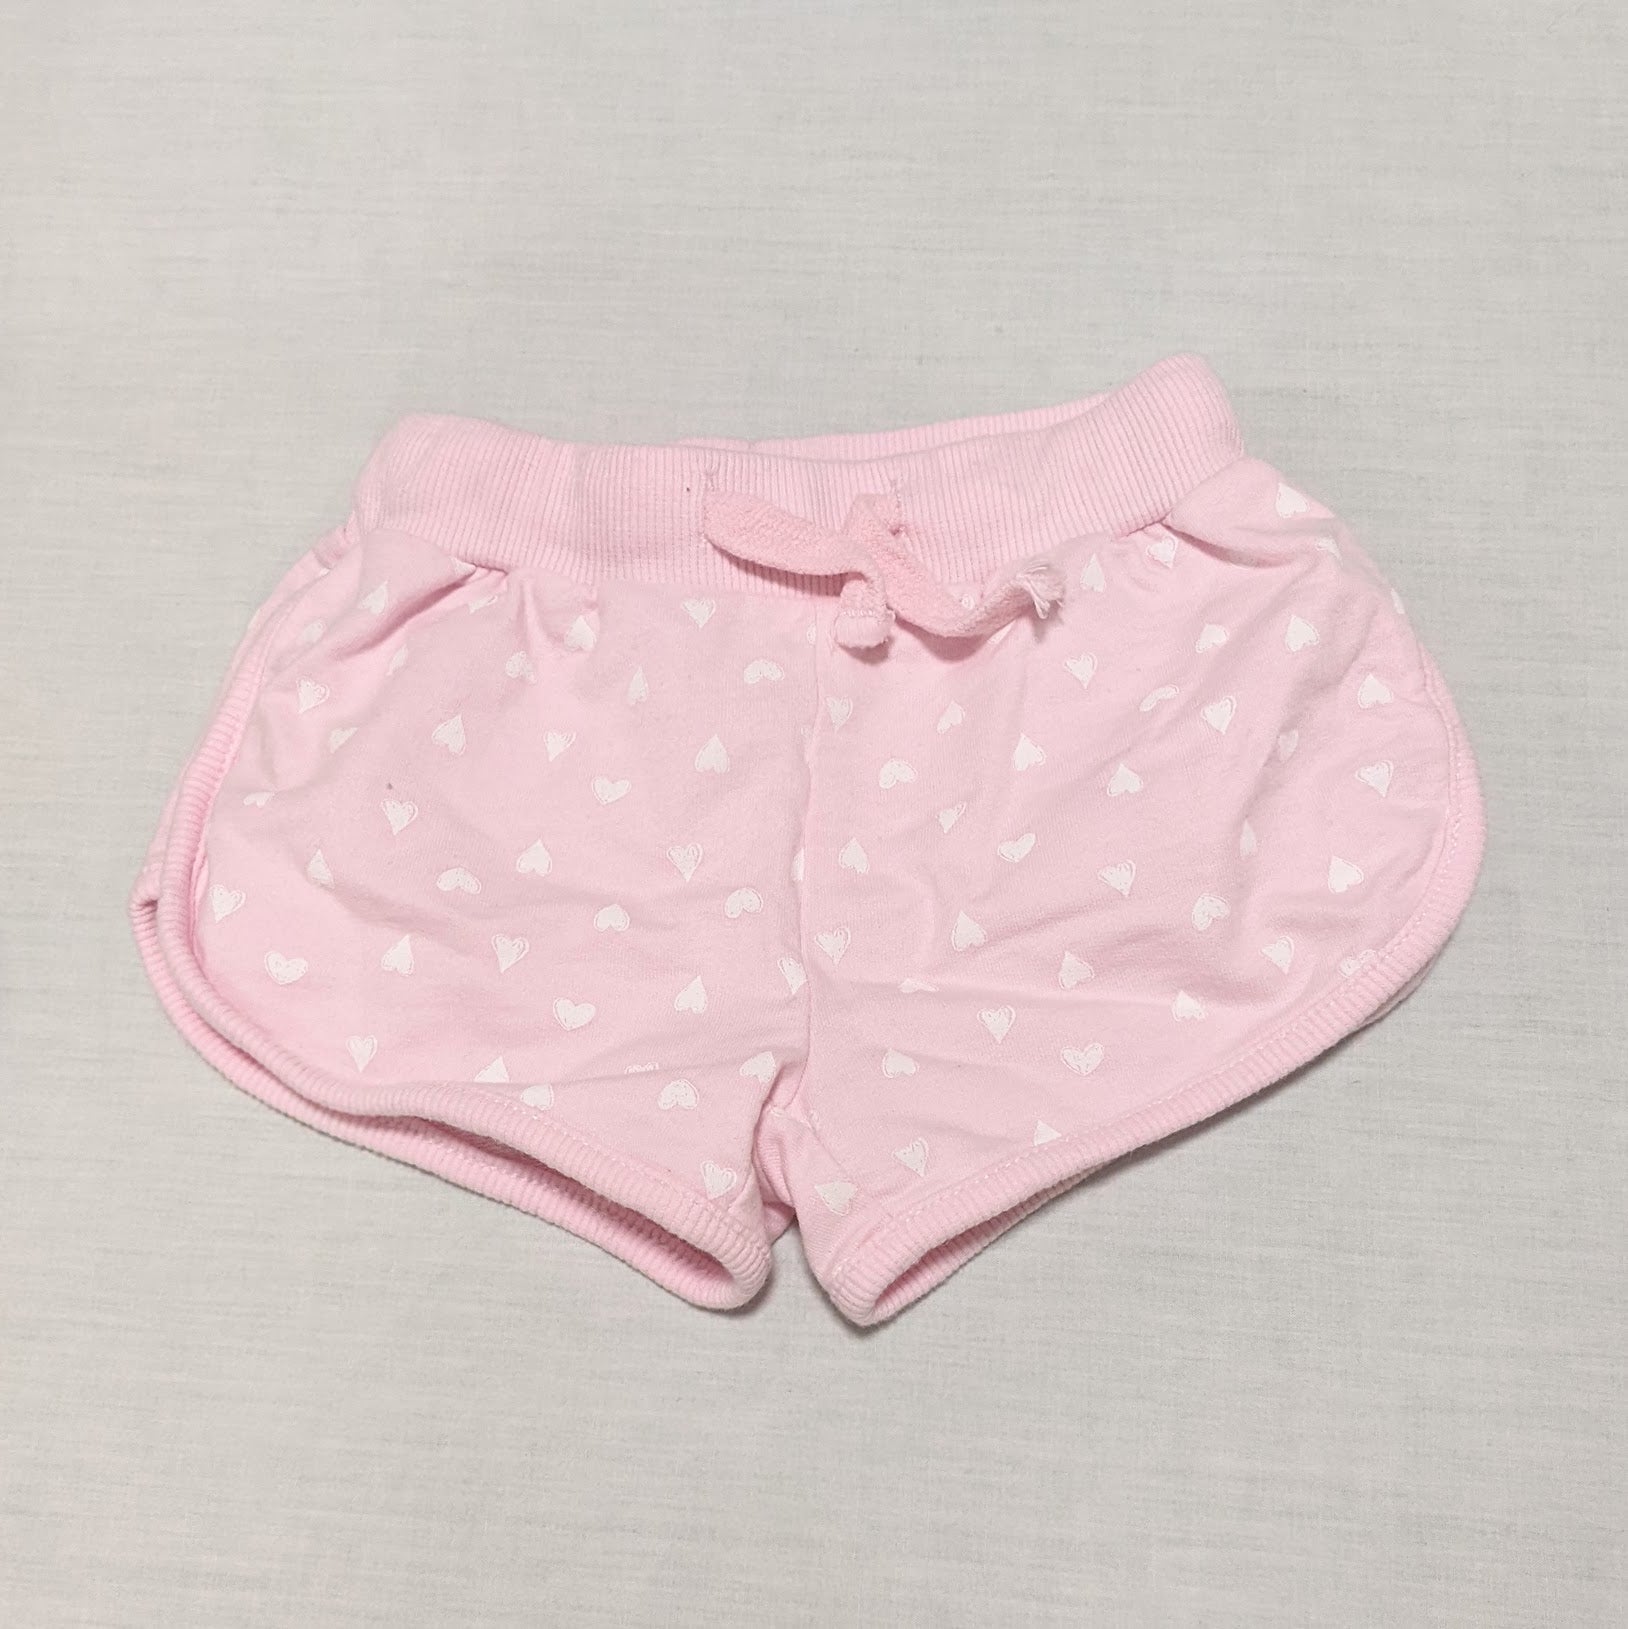 Pink & white heart shorts - size 000